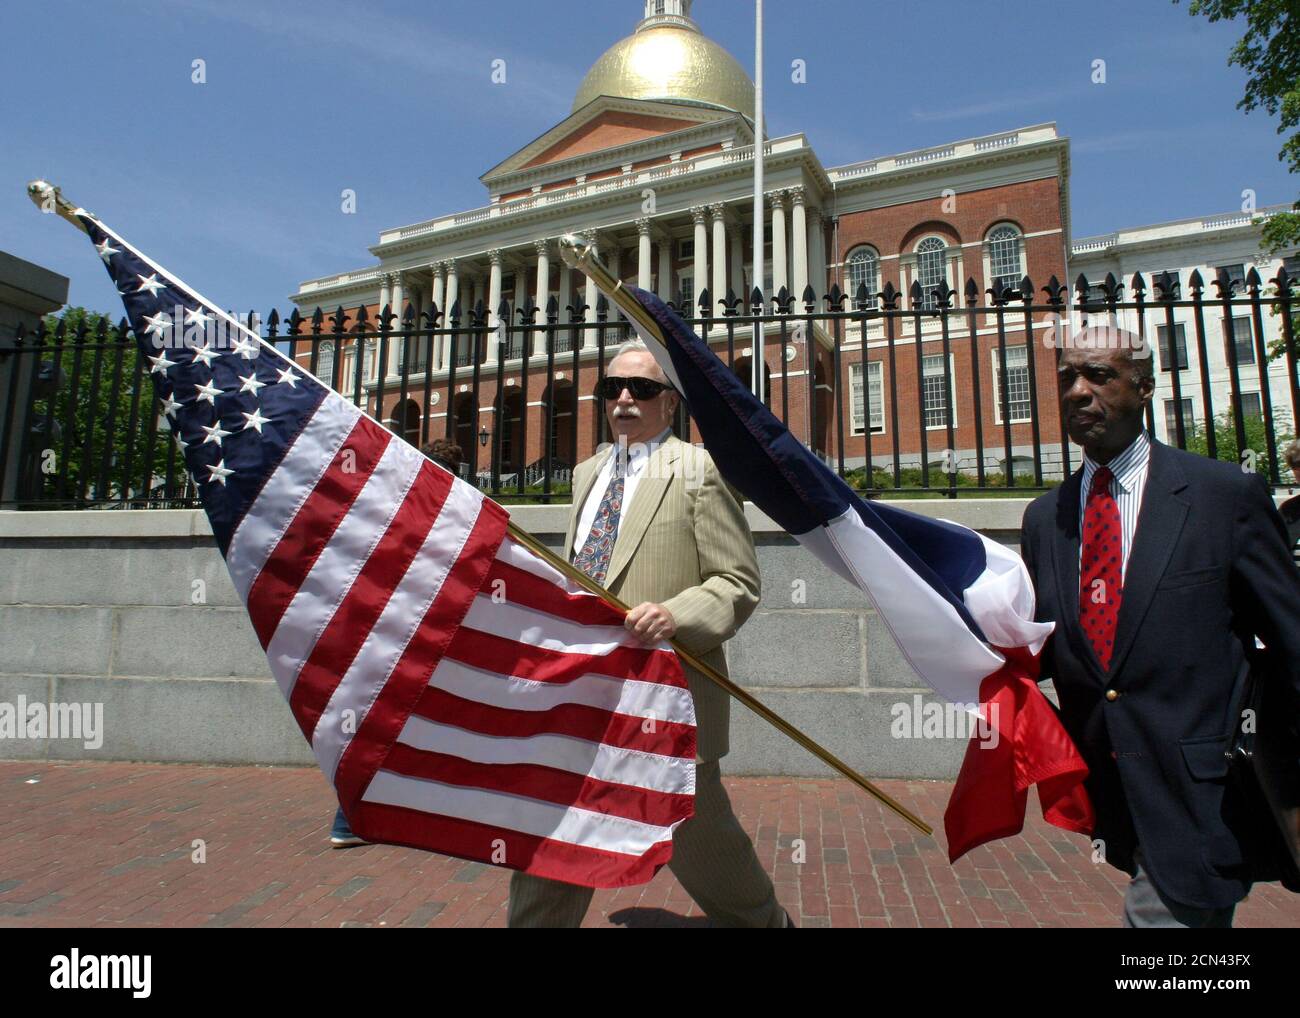 U.S. citizens John Hermanson (L) and Enoch Woodhouse (R) of the Massachusetts Lafayette society carry United States and French flags side by side at the Massachusetts Statehouse (rear) in Boston, May 20, 2003. Woodhouse and Hermanson were on their way to ceremonies commemorating the 169th anniversary of the death the Marquis de Lafayette, a French General and politician who became a hero in the American revolutionary war. French and local officials joined together at the event in reasserting the common democratic values of the two countries despite recent diplomatic and military policy differe Stock Photo